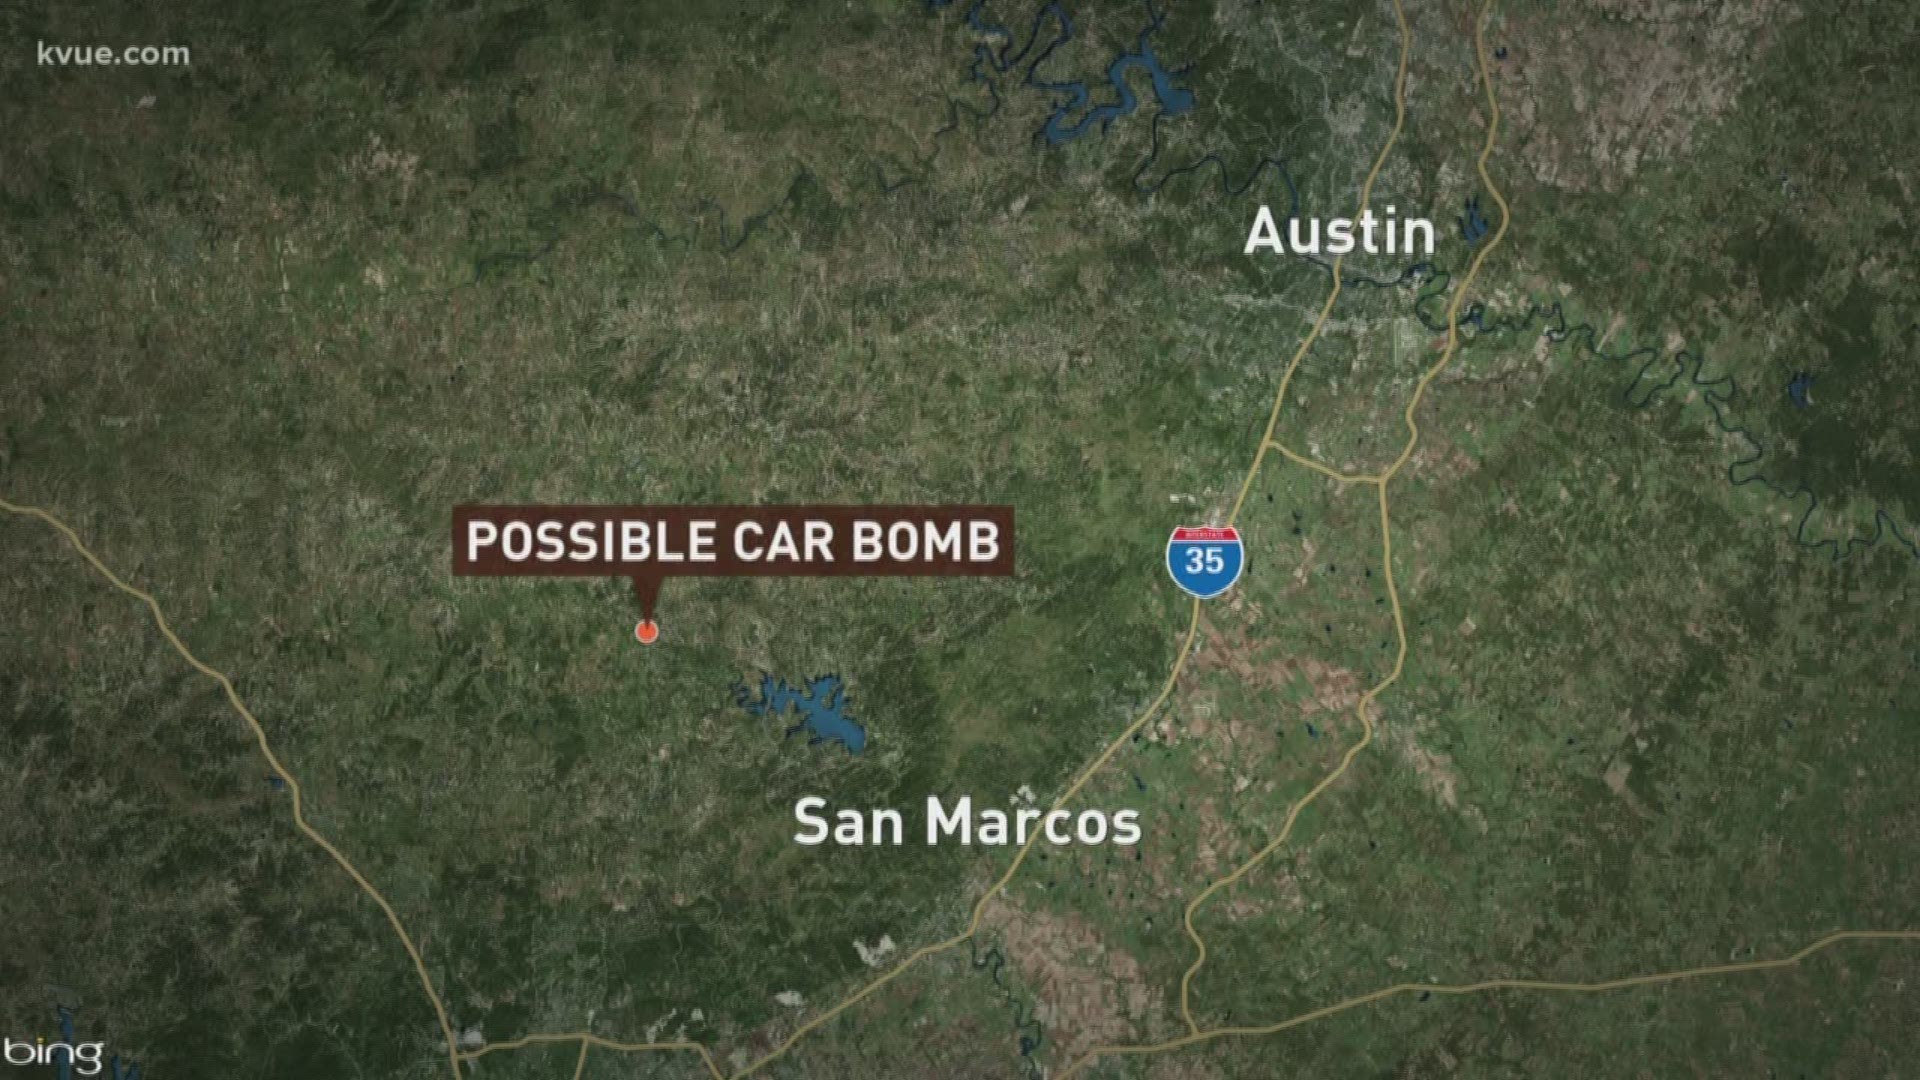 Police are investigating a possible car bomb near US 281 and Contour Drive.